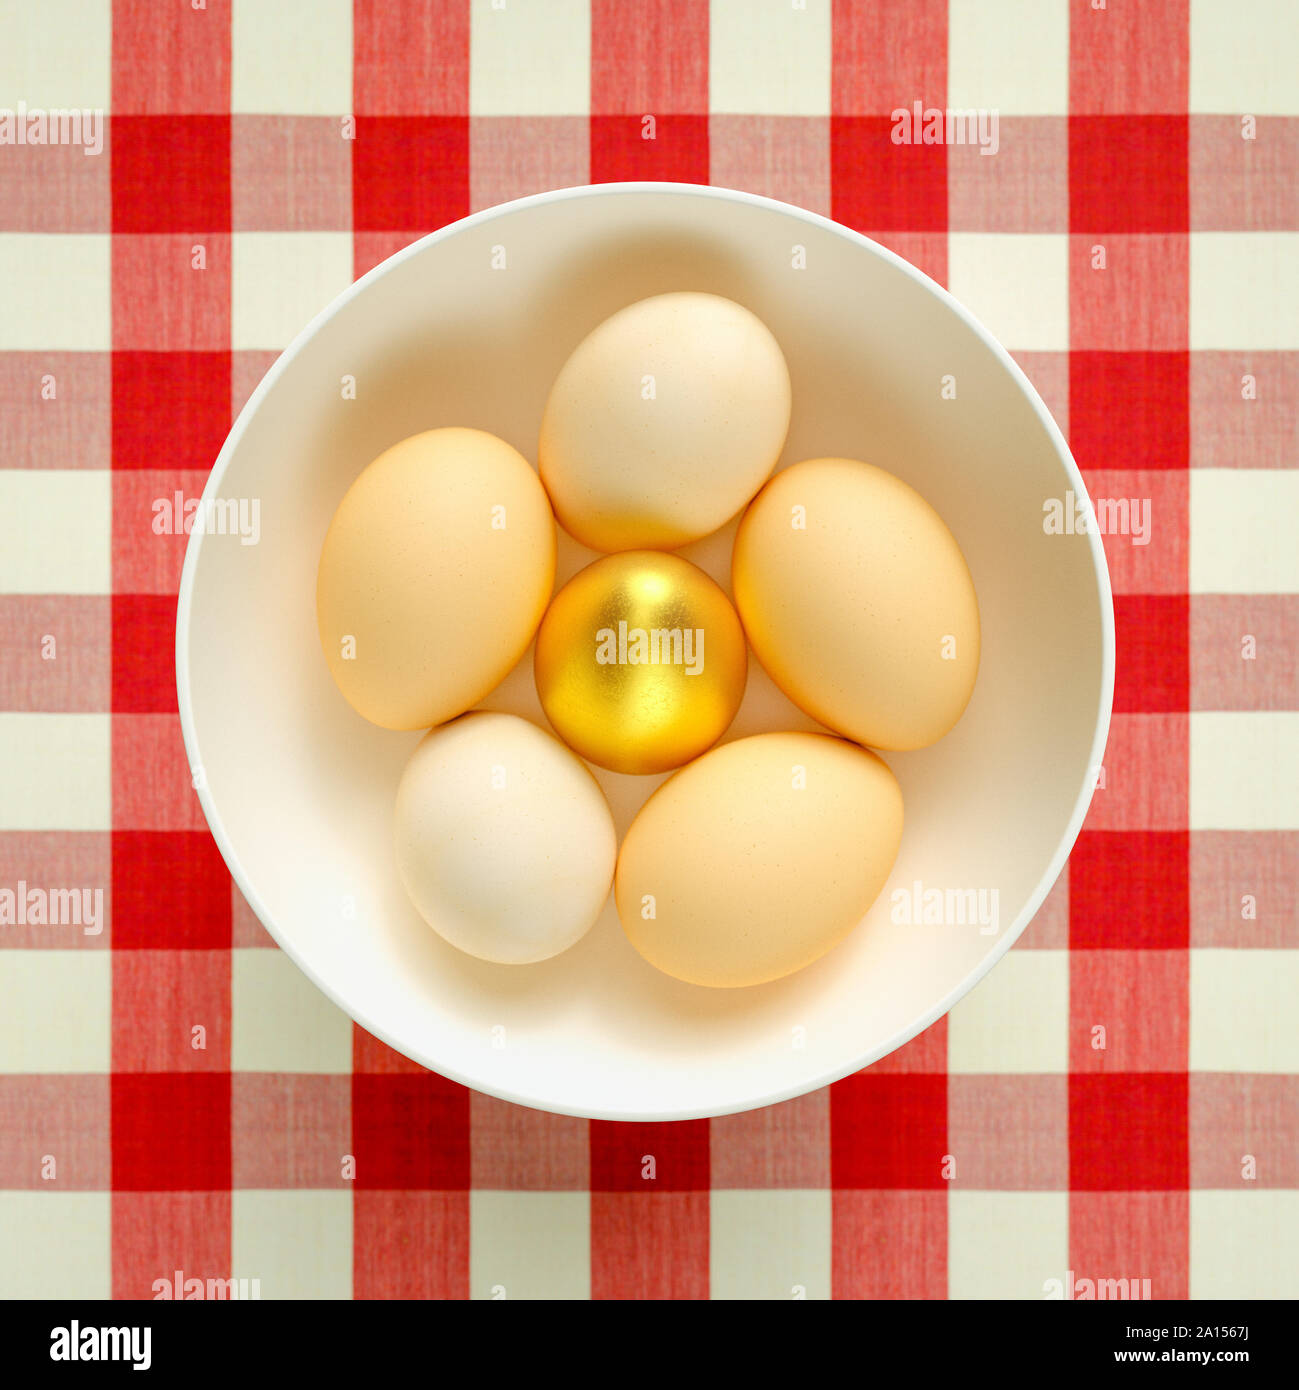 Golden egg in a bowl of eggs - overhead view Stock Photo